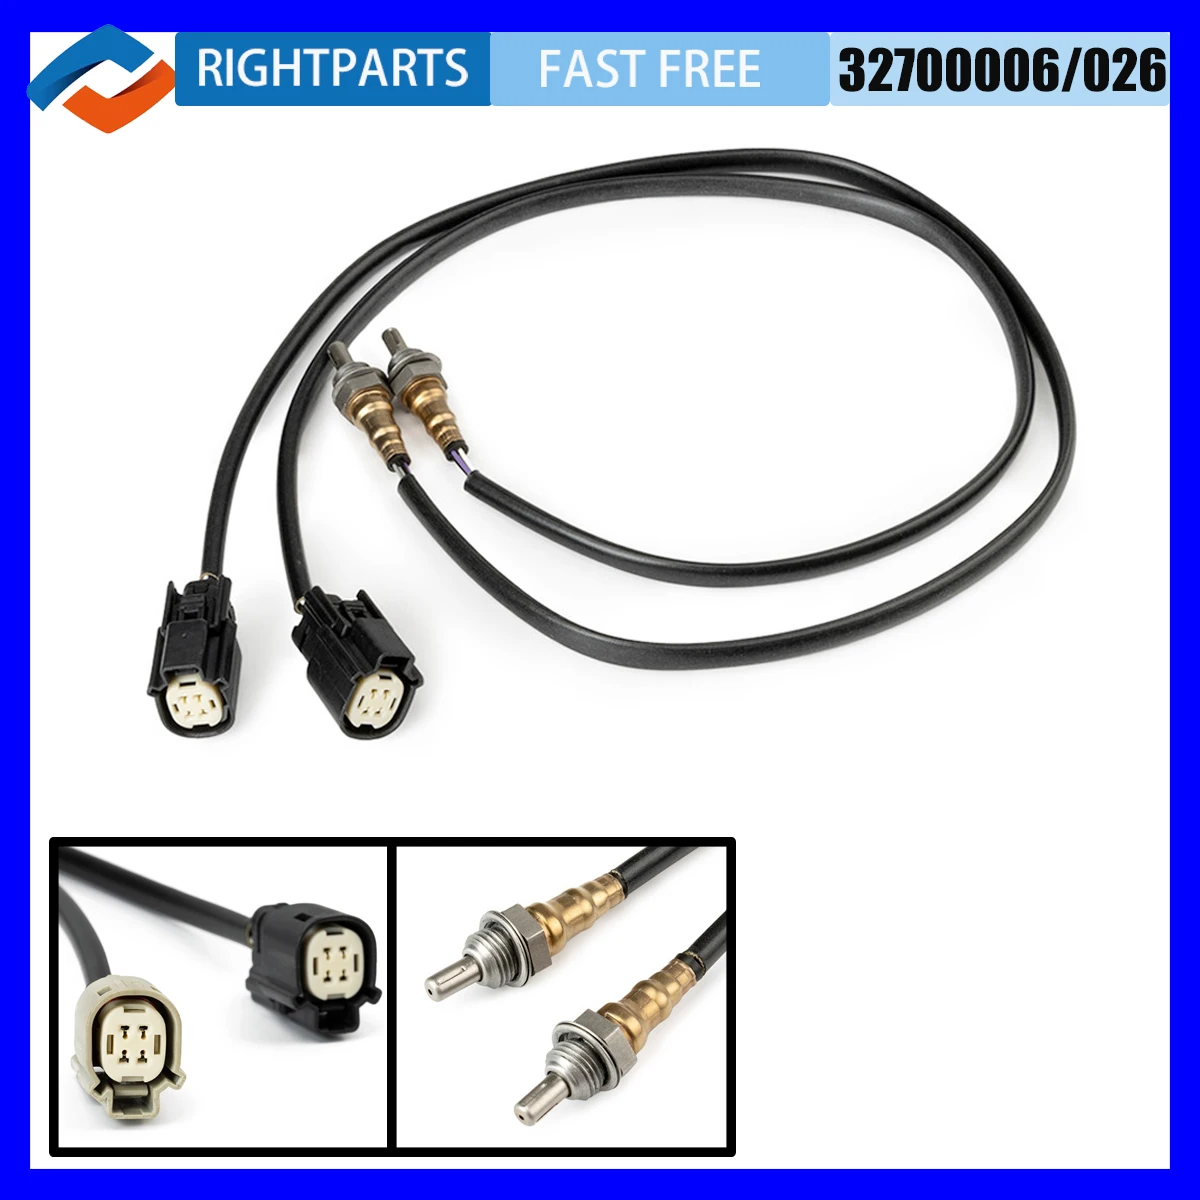 

RIGHTPARTS 2x 32700006 32700026 Front & Rear Oxygen Sensor For Harley Davidson Sportster 883 1200 Seventy Two Forty Eight 14-18